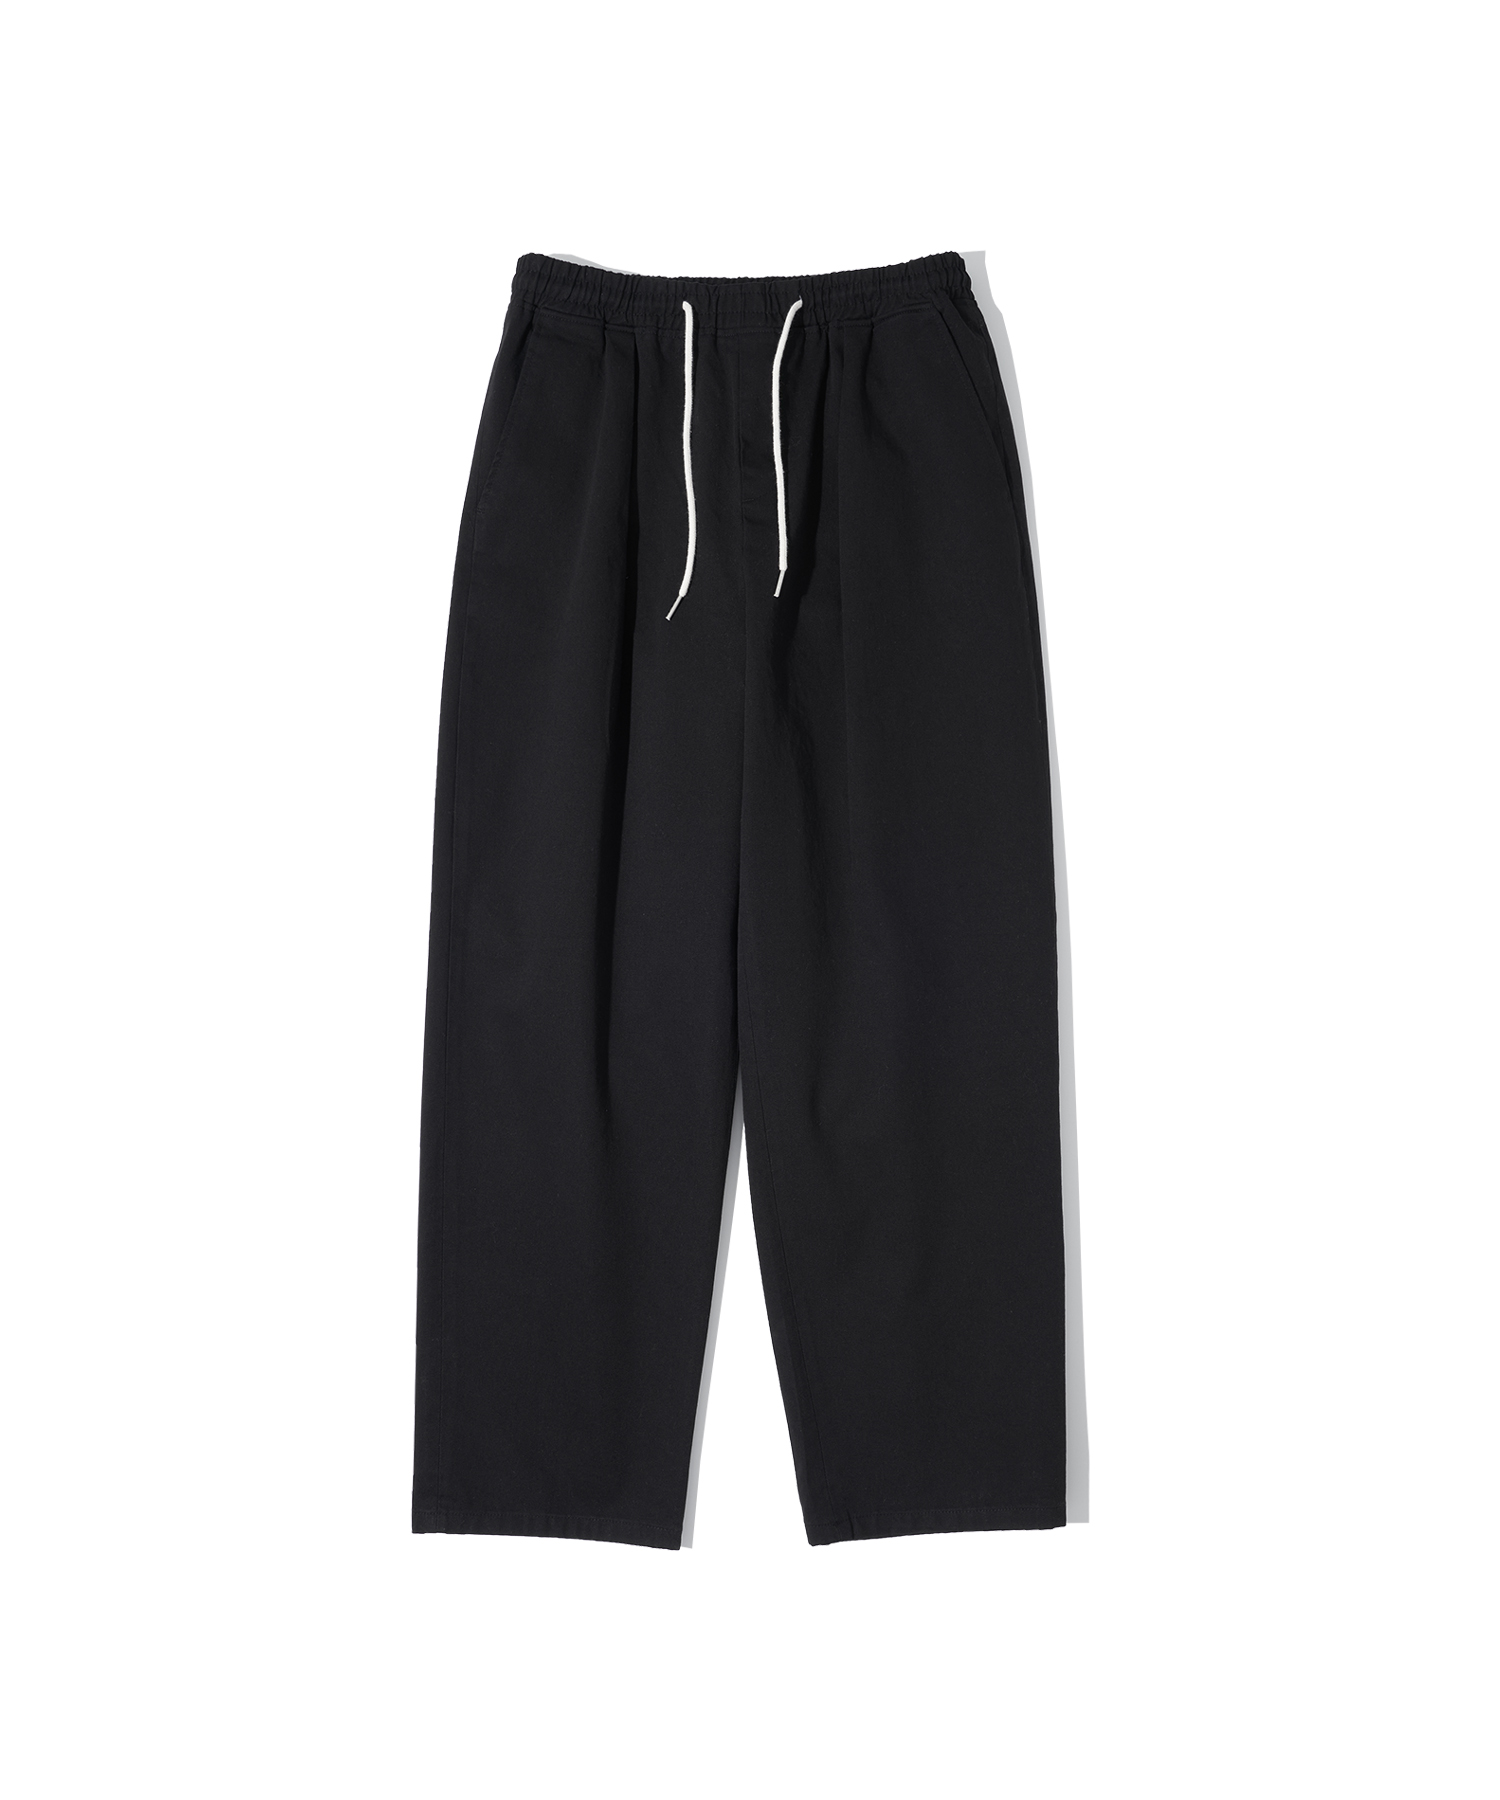 P10001 One tuck tapered pants_Black